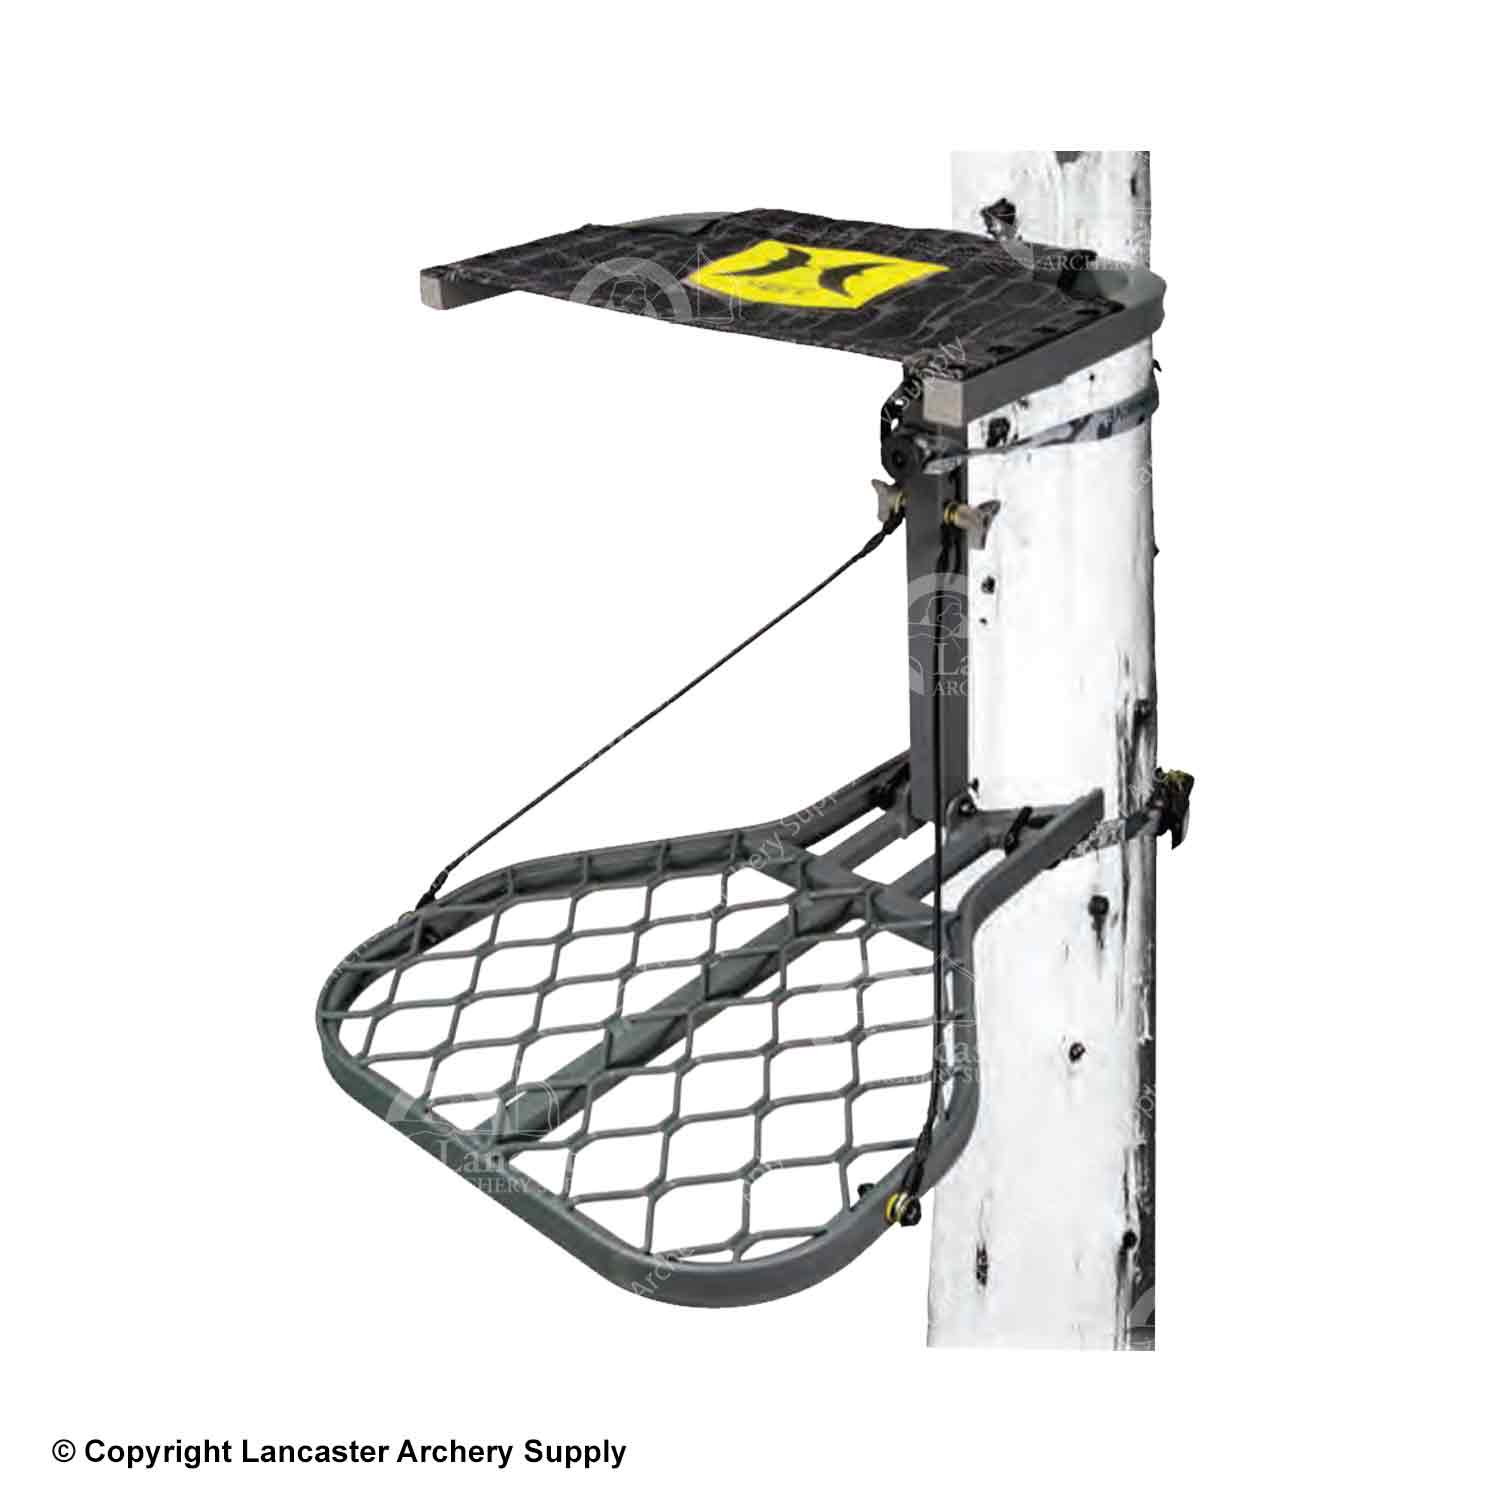 HAWK Rival MICRO Hang-On Tree Stand